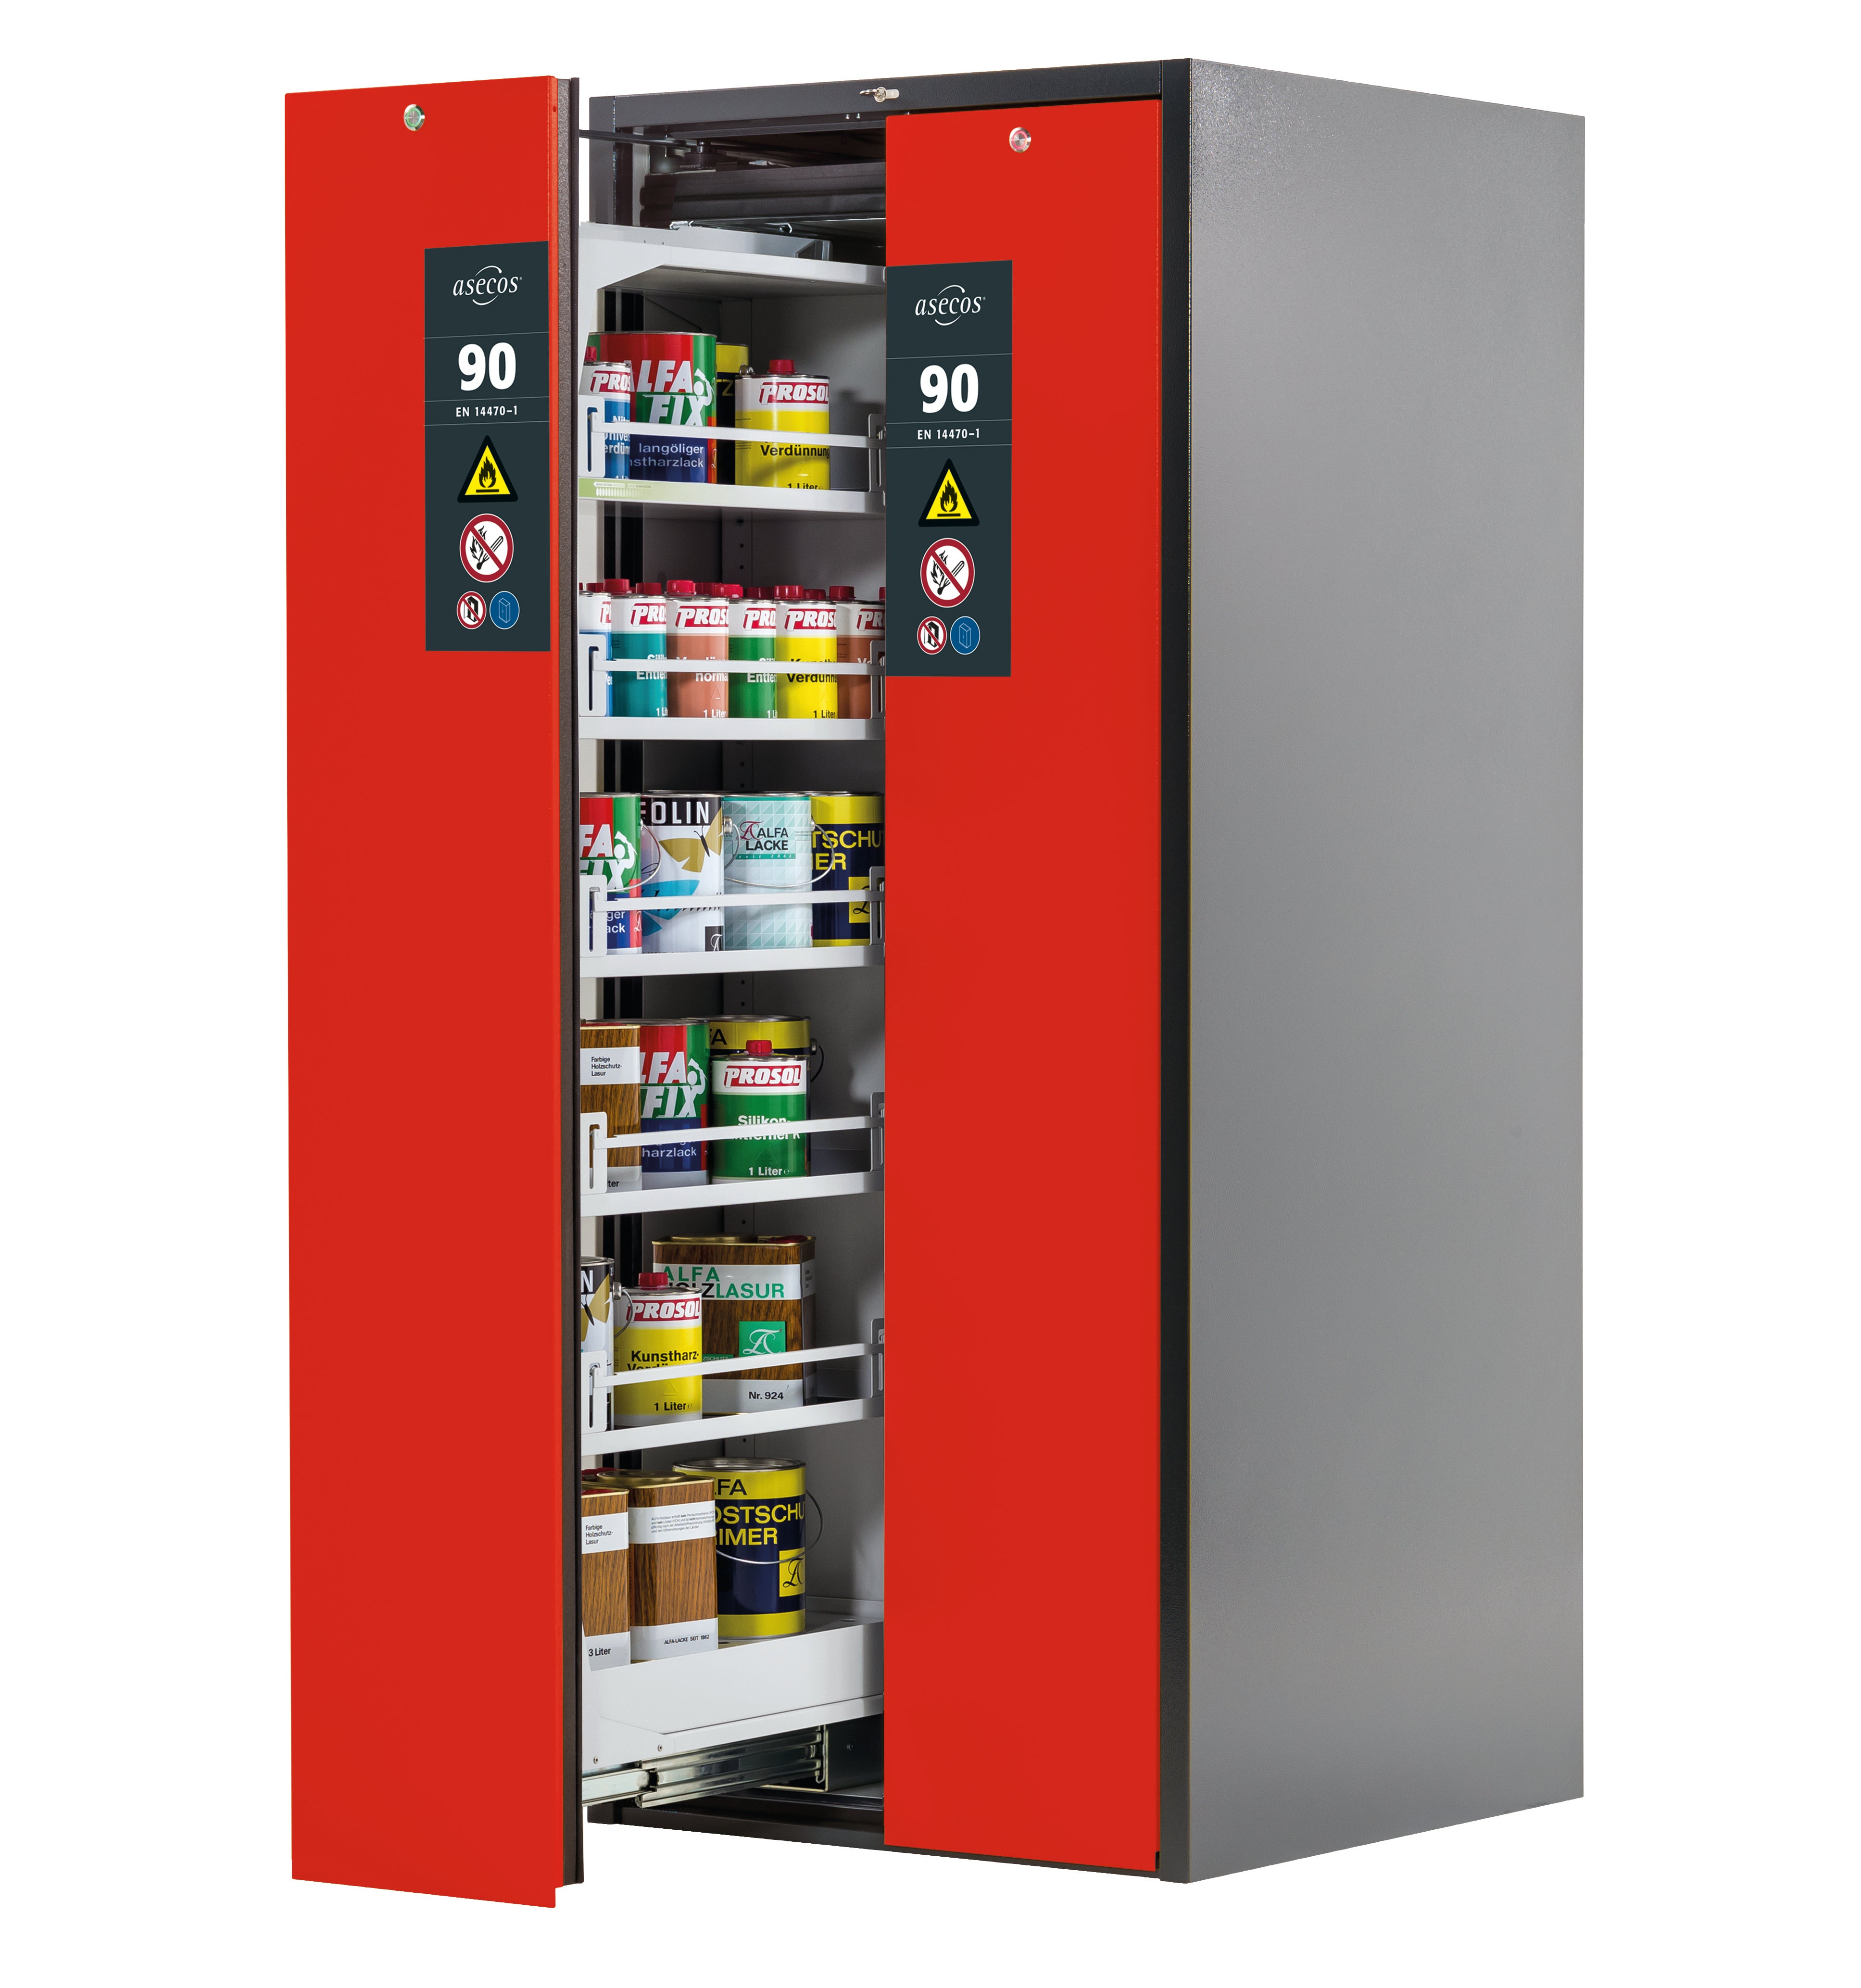 Type 90 safety cabinet V-MOVE-90 model V90.196.081.VDAC:0013 in traffic red RAL 3020 with 5x standard shelves (sheet steel)